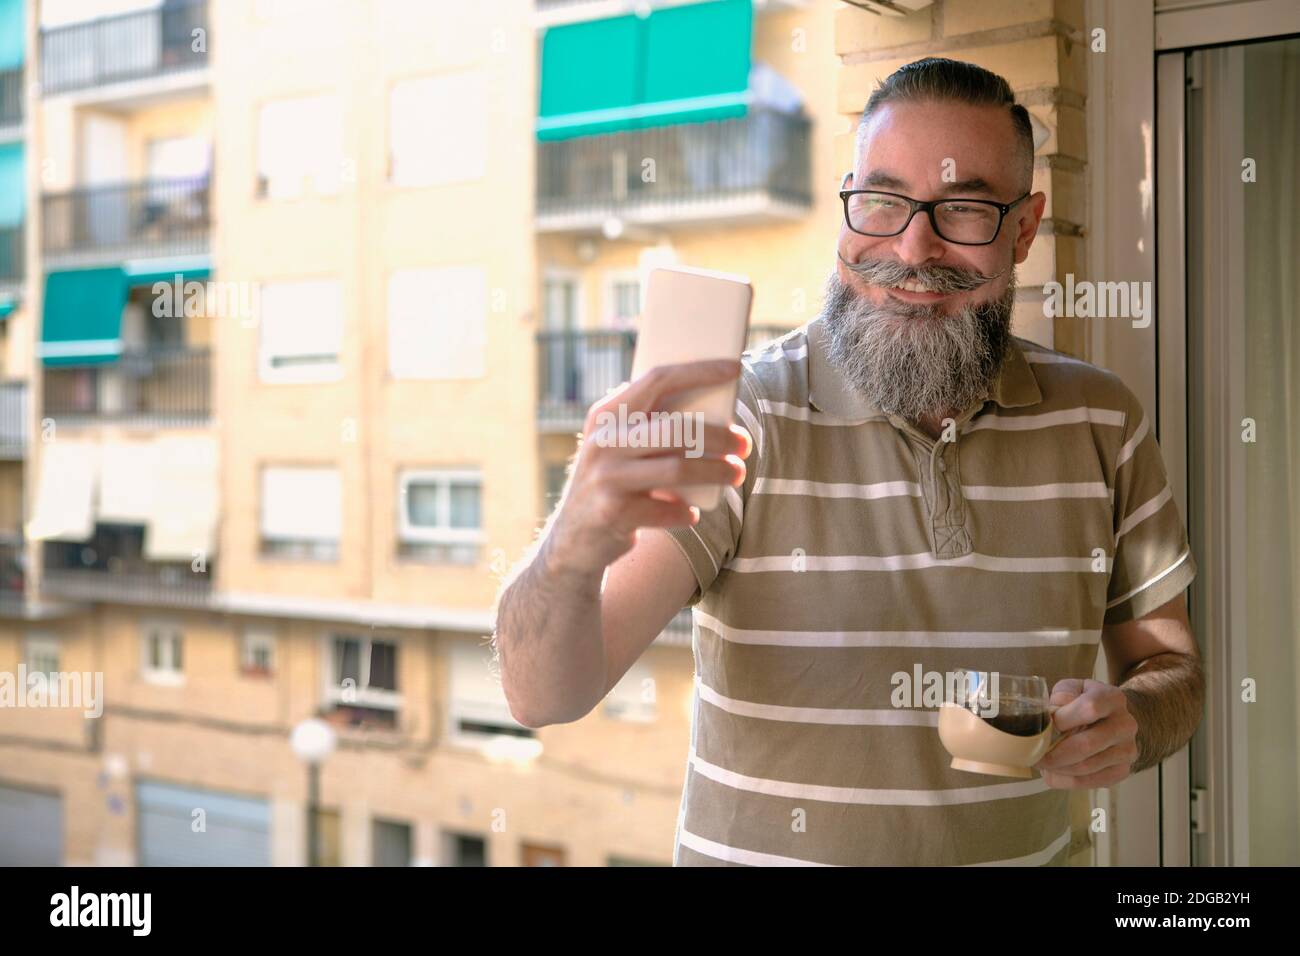 Bearded man with glasses using the cell phone on the balcony of the house to chat and take selfies while smiling and holding a cup of coffee in the ot Stock Photo